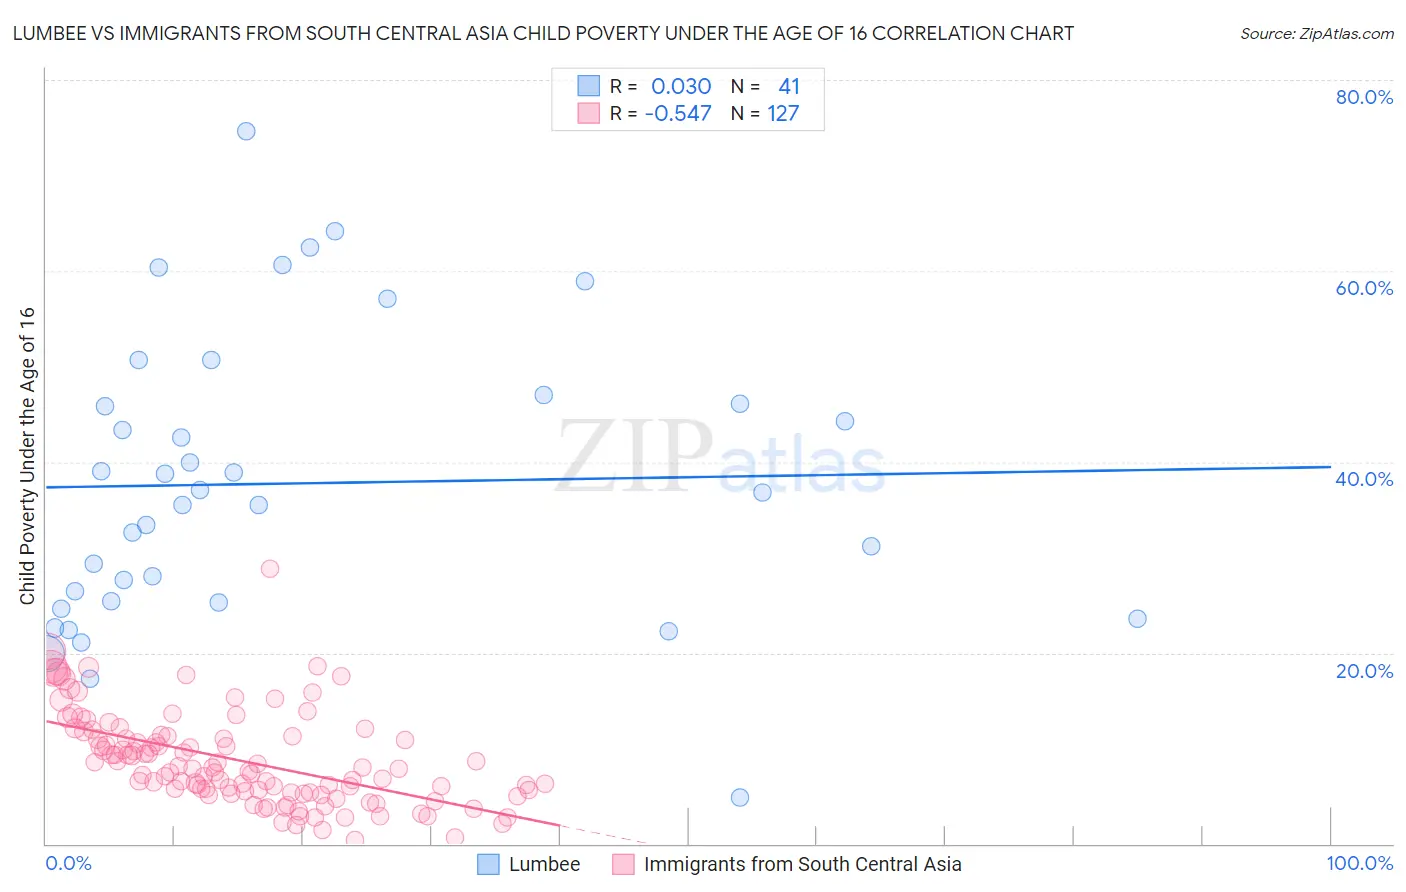 Lumbee vs Immigrants from South Central Asia Child Poverty Under the Age of 16